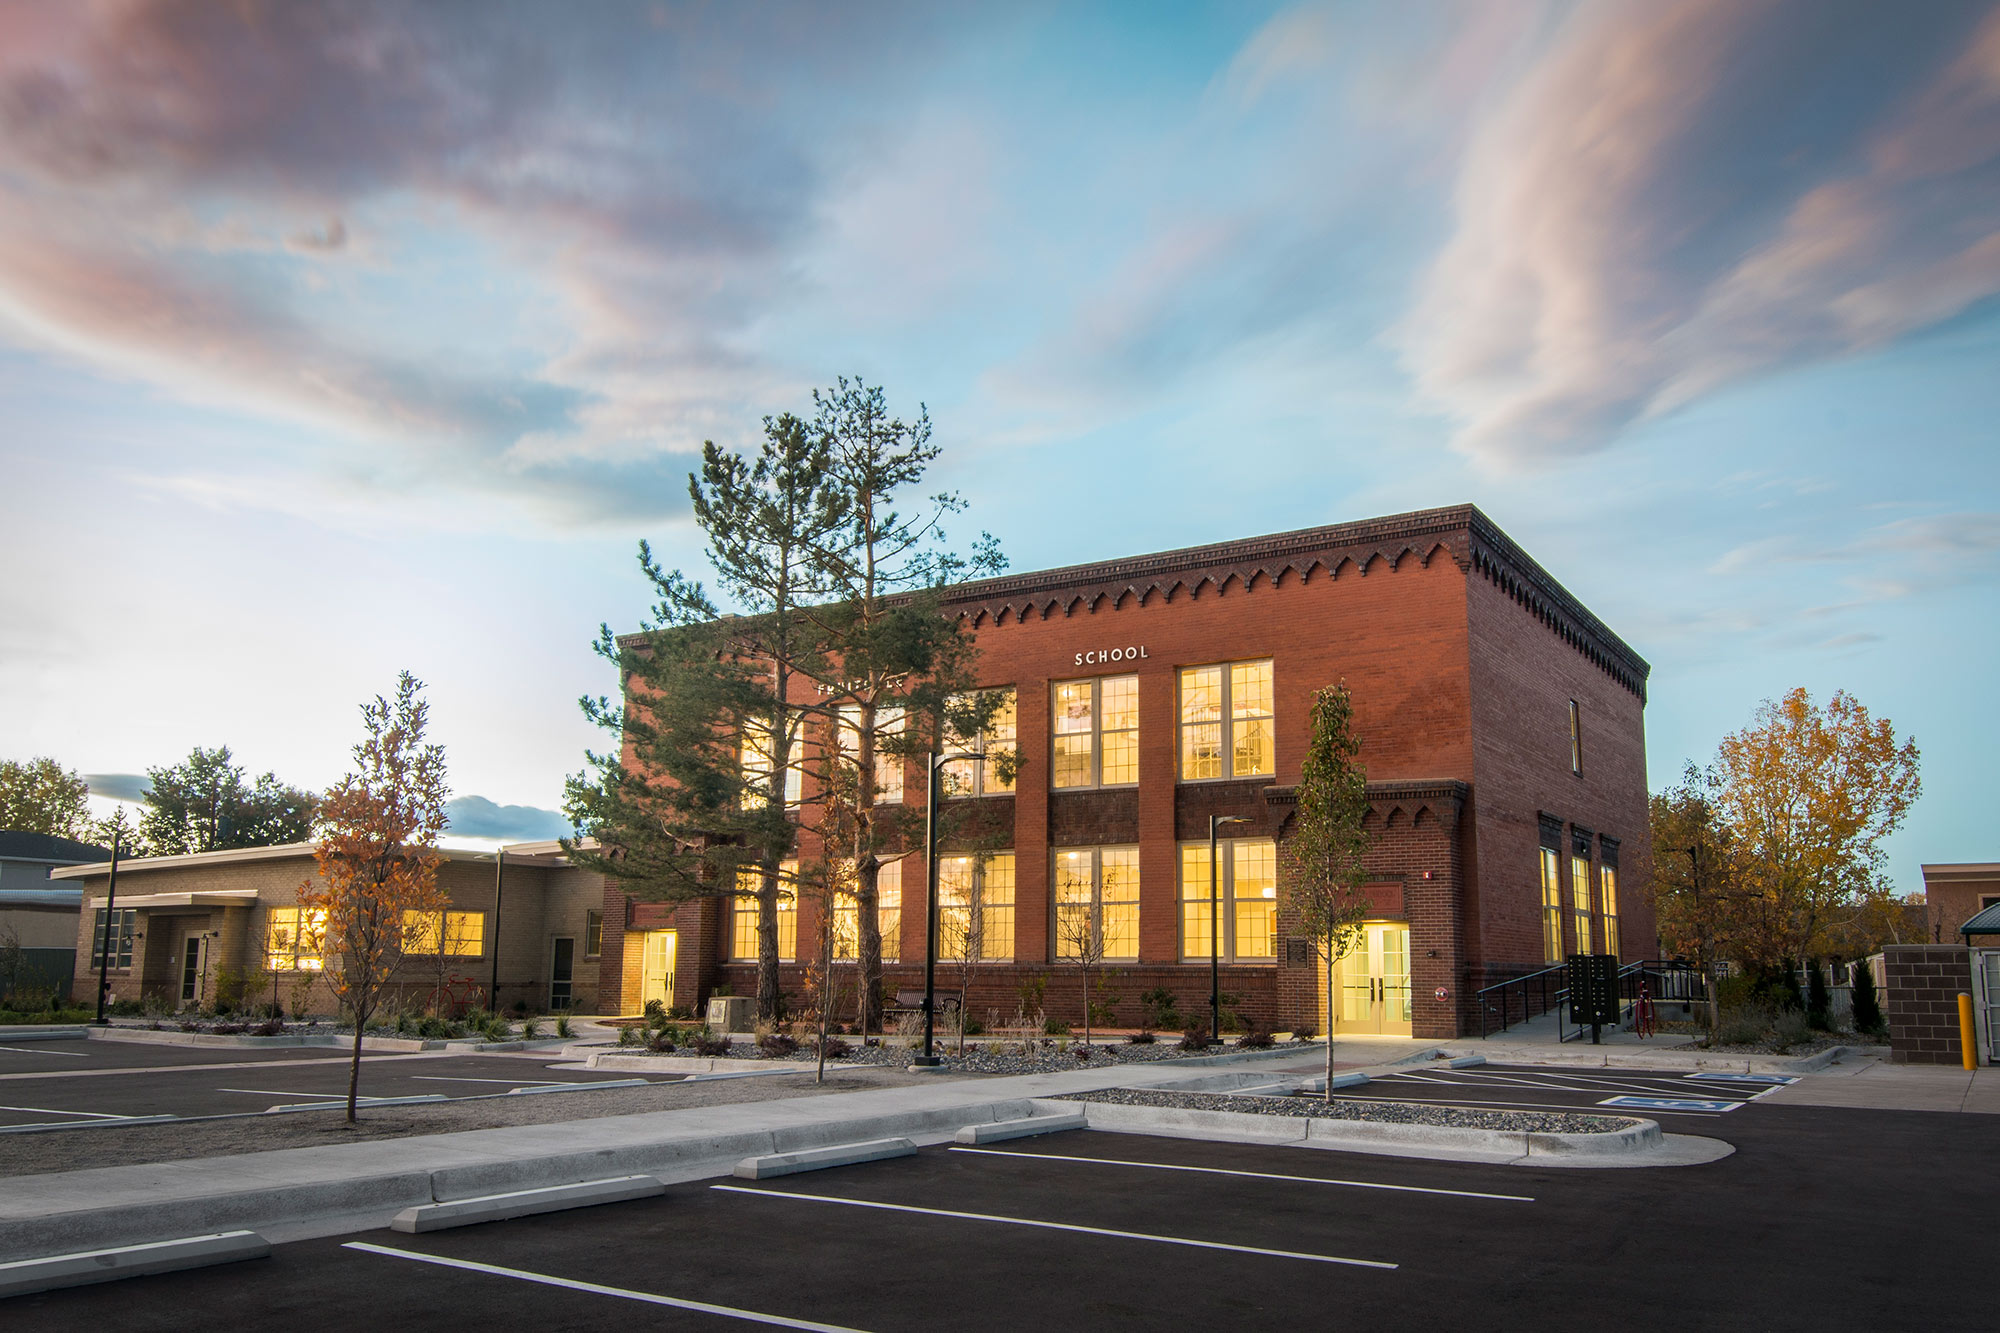 The converted, red brick Fruitdale Elementary School in Wheat Ridge, at sunset (October 2017).